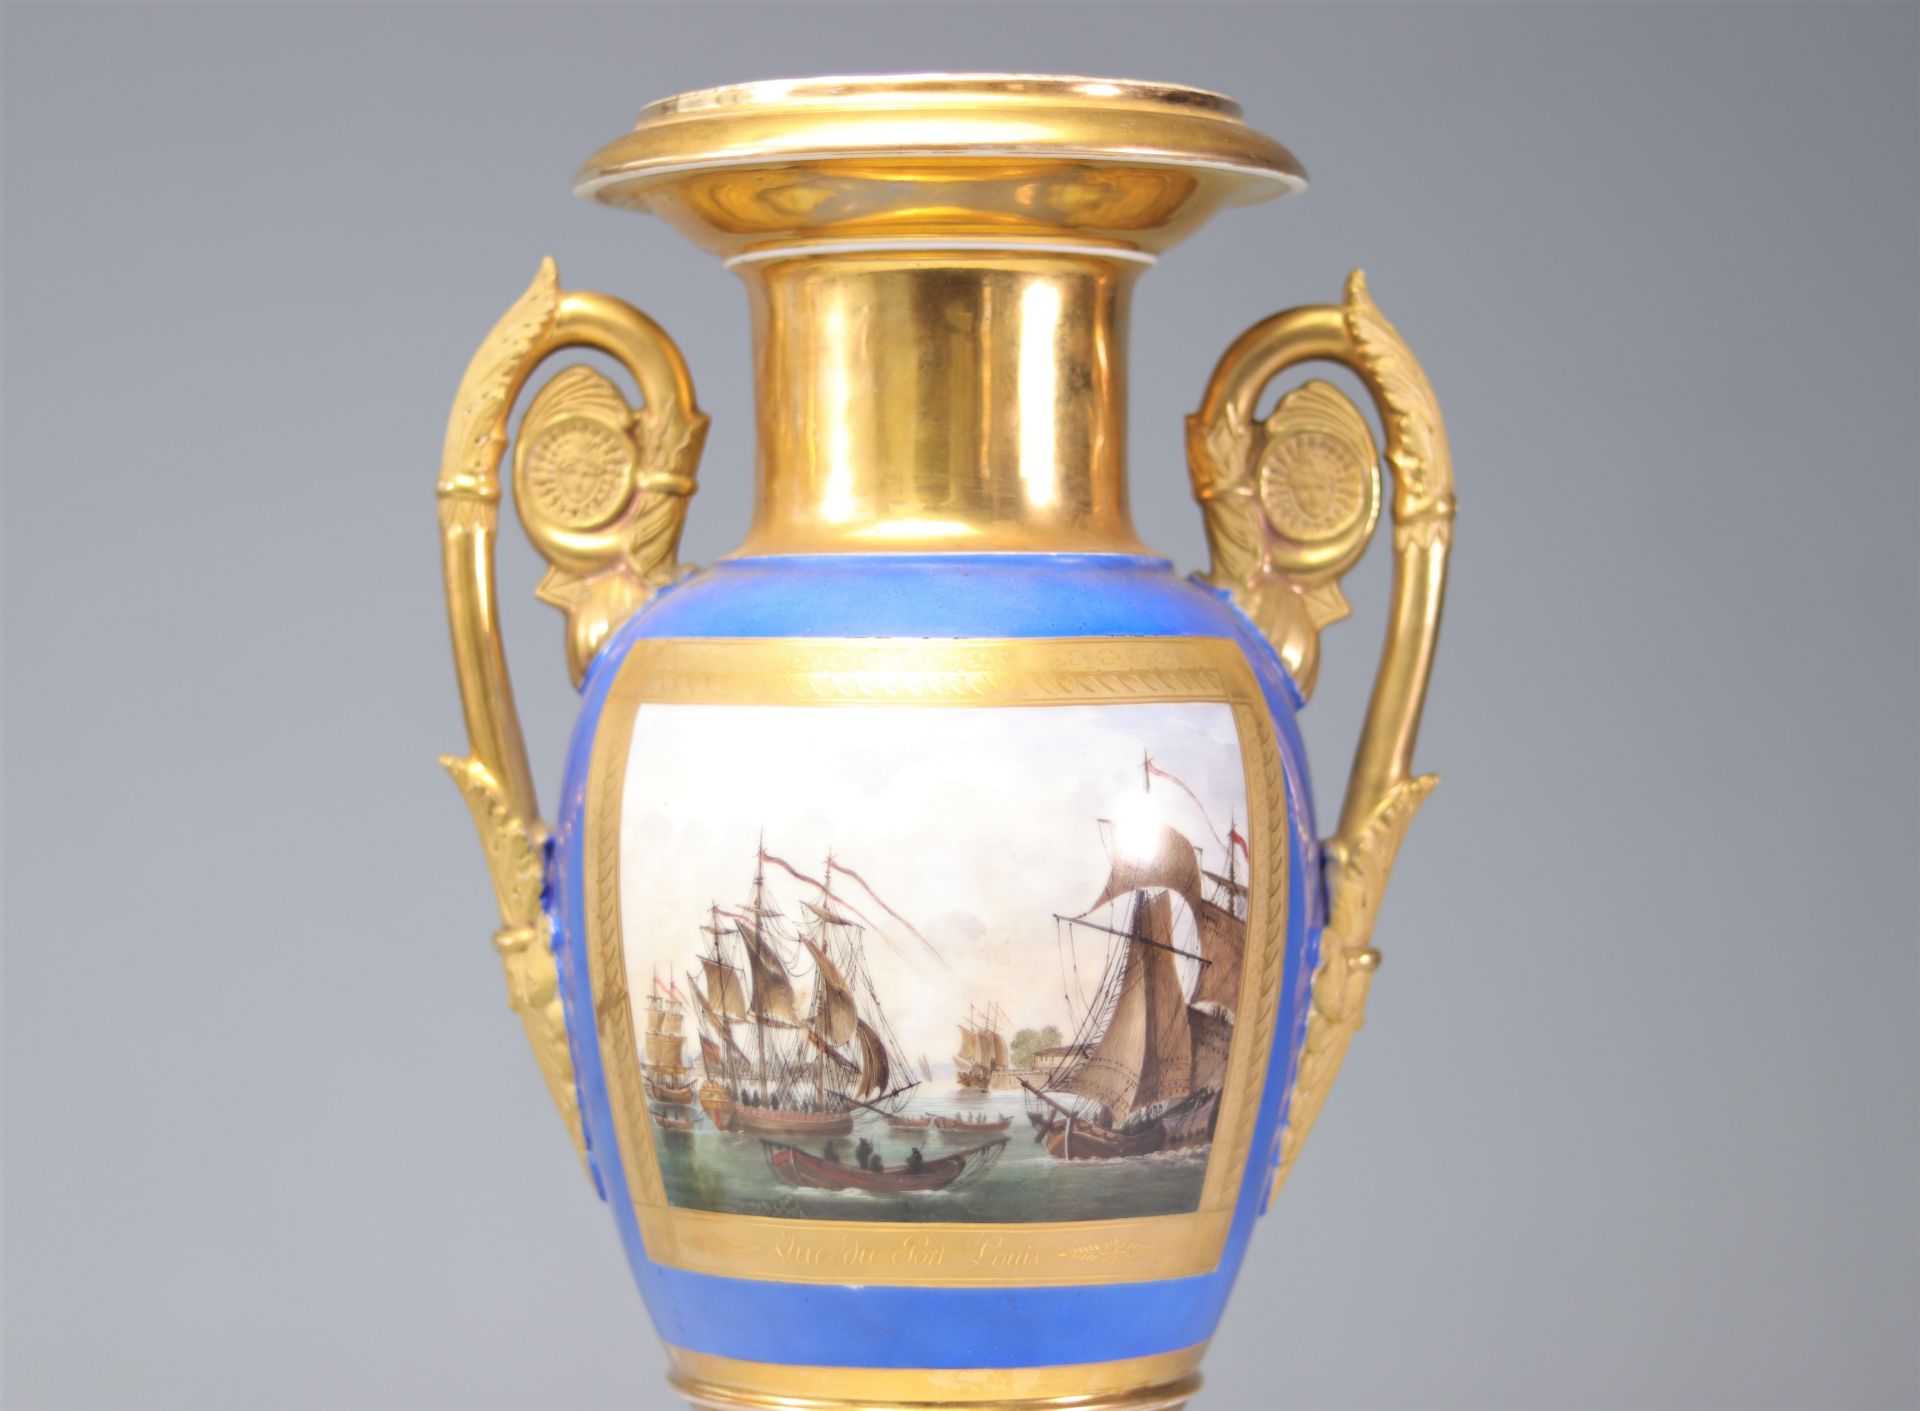 Pair of Empire period vases with port scenes "Port Louis and Dunkirk" - Image 5 of 5